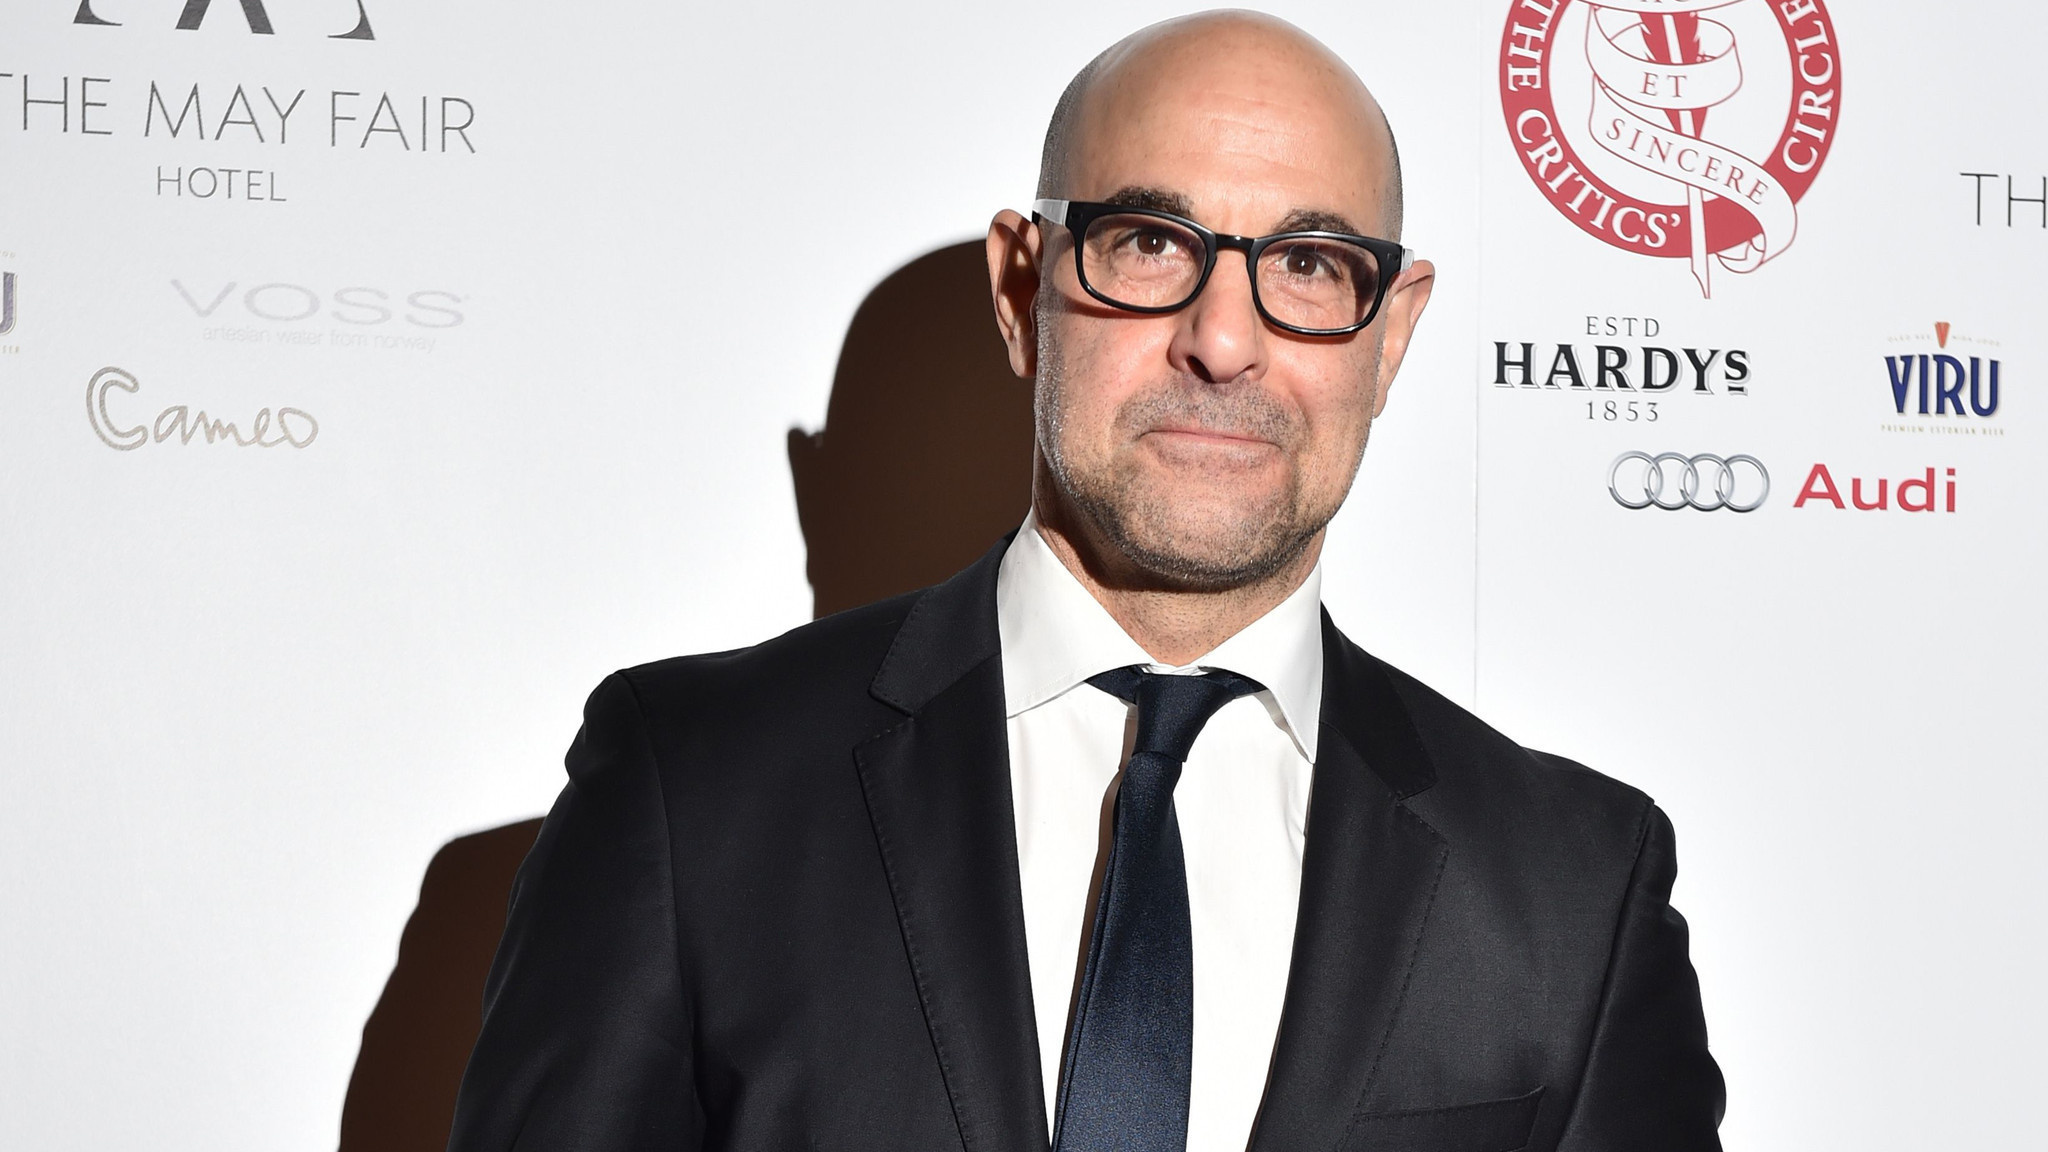 Stanley Tucci, Actor's wallpapers, Posted by Ethan Peltier, 2050x1160 HD Desktop